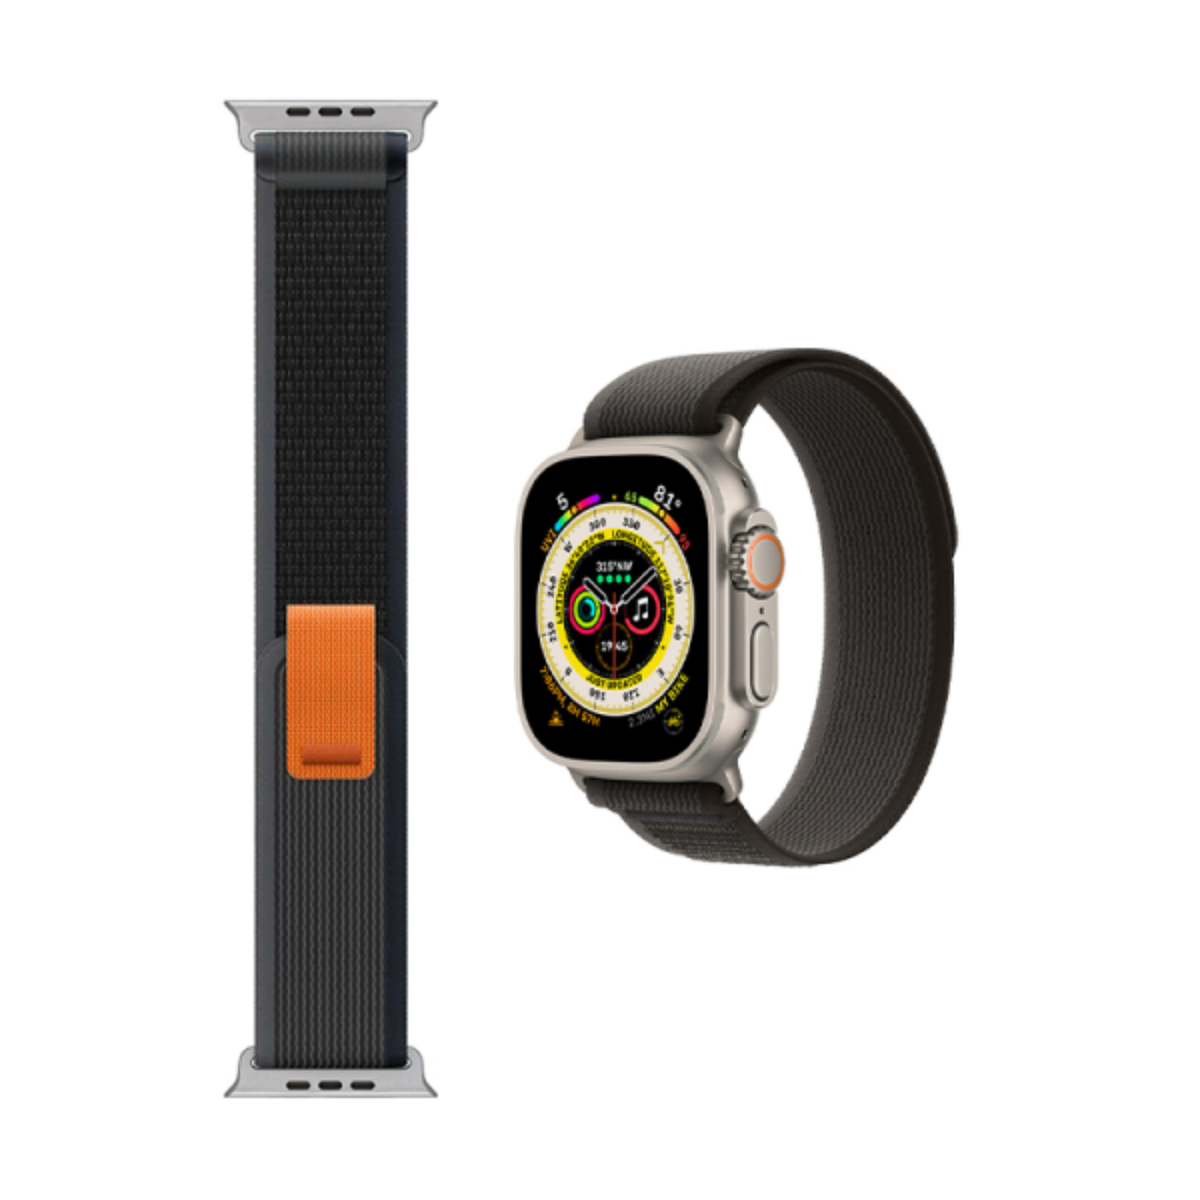 Wiwu Trail Loop Watch Band for iWatch, 42 to 49 mm, Black/Grey, STRAP193